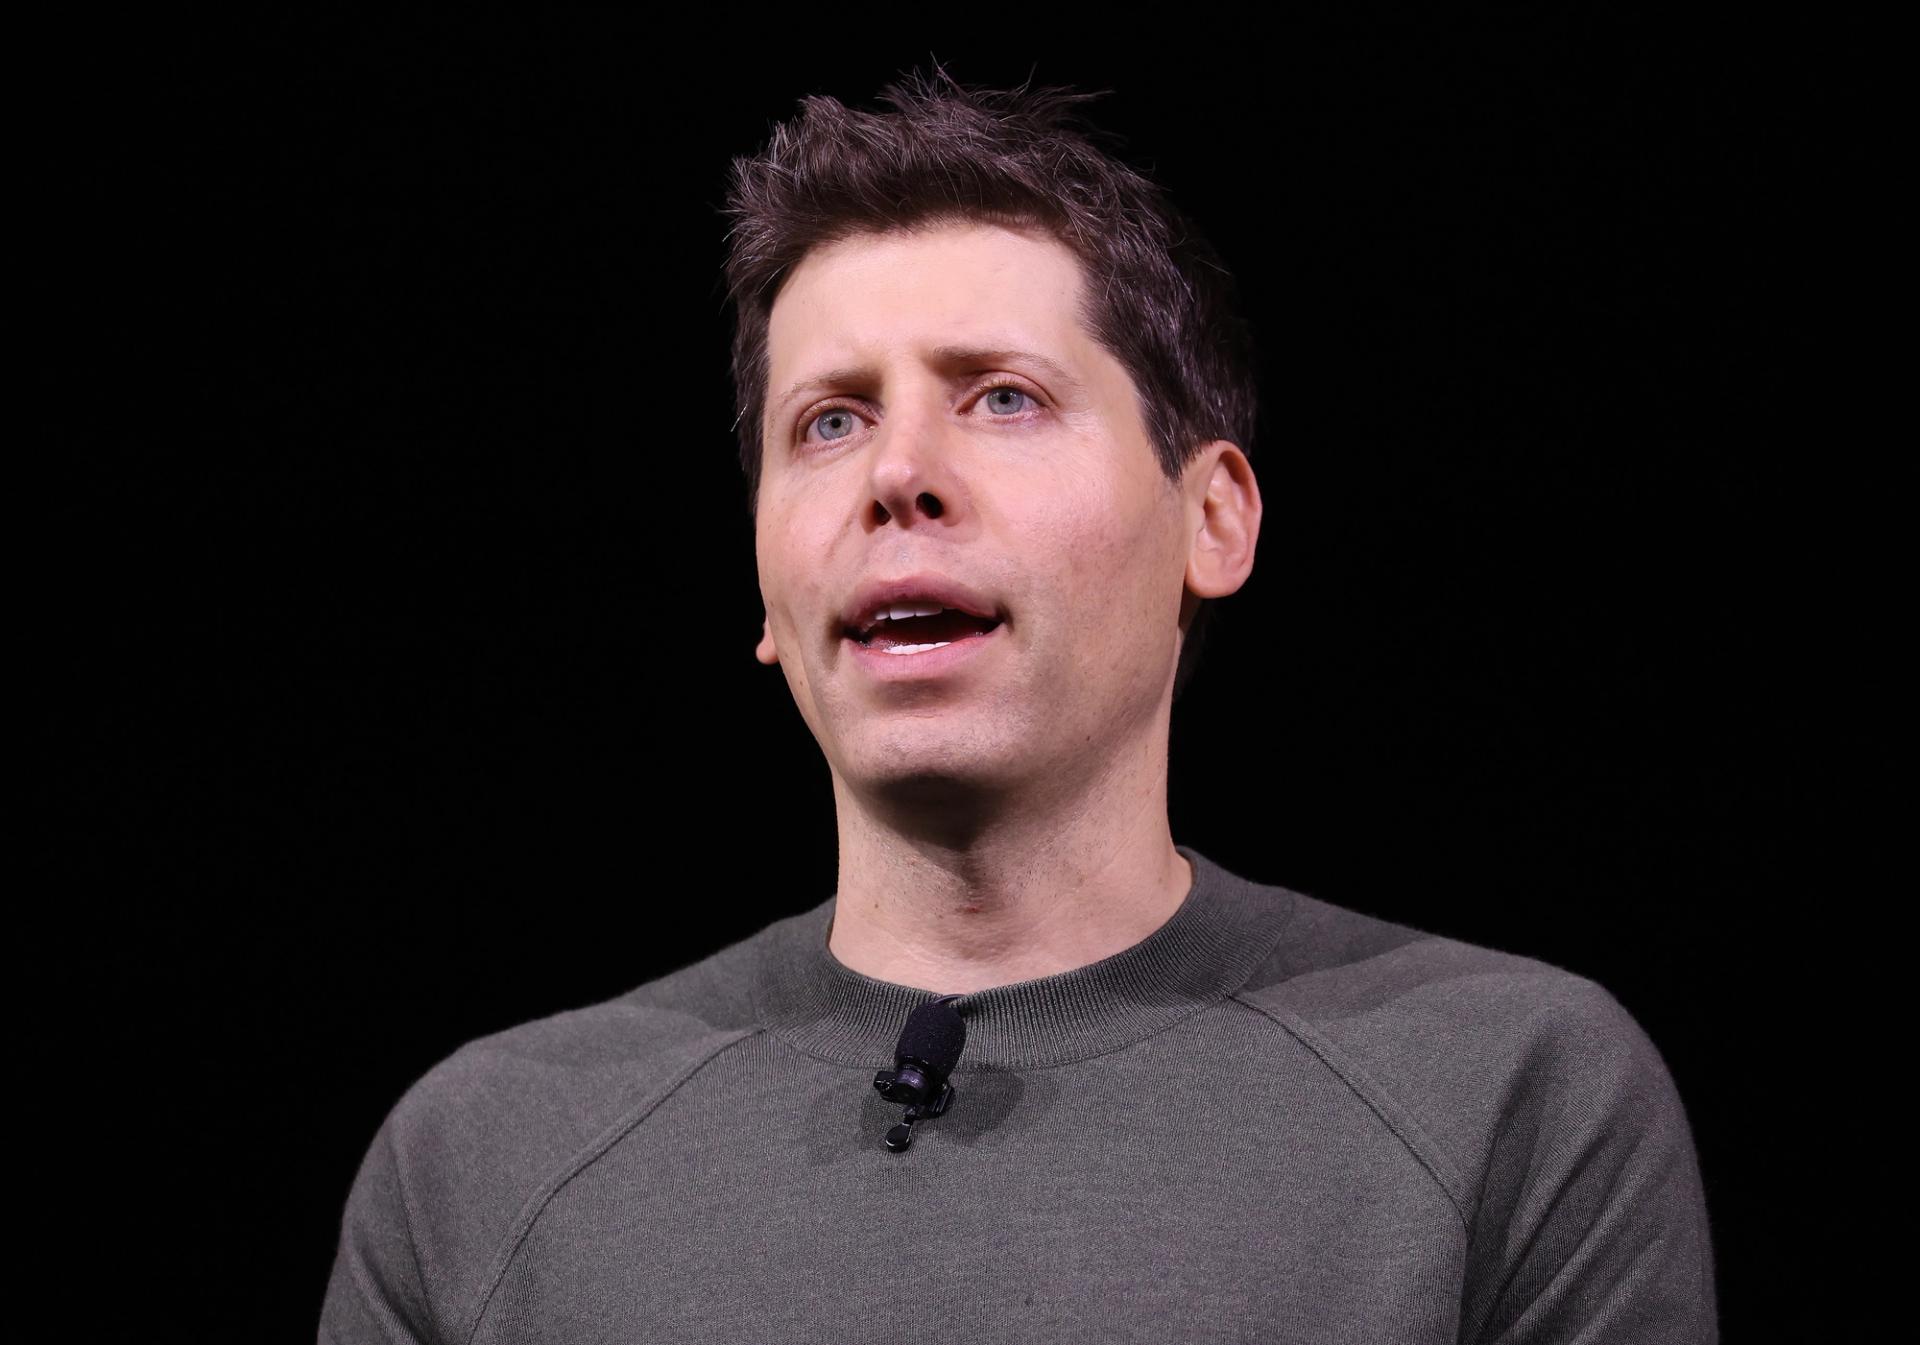 SAN FRANCISCO, CALIFORNIA - NOVEMBER 06: OpenAI CEO Sam Altman speaks during the OpenAI DevDay event on November 06, 2023 in San Francisco, California. Altman delivered the keynote address at the first-ever Open AI DevDay conference.